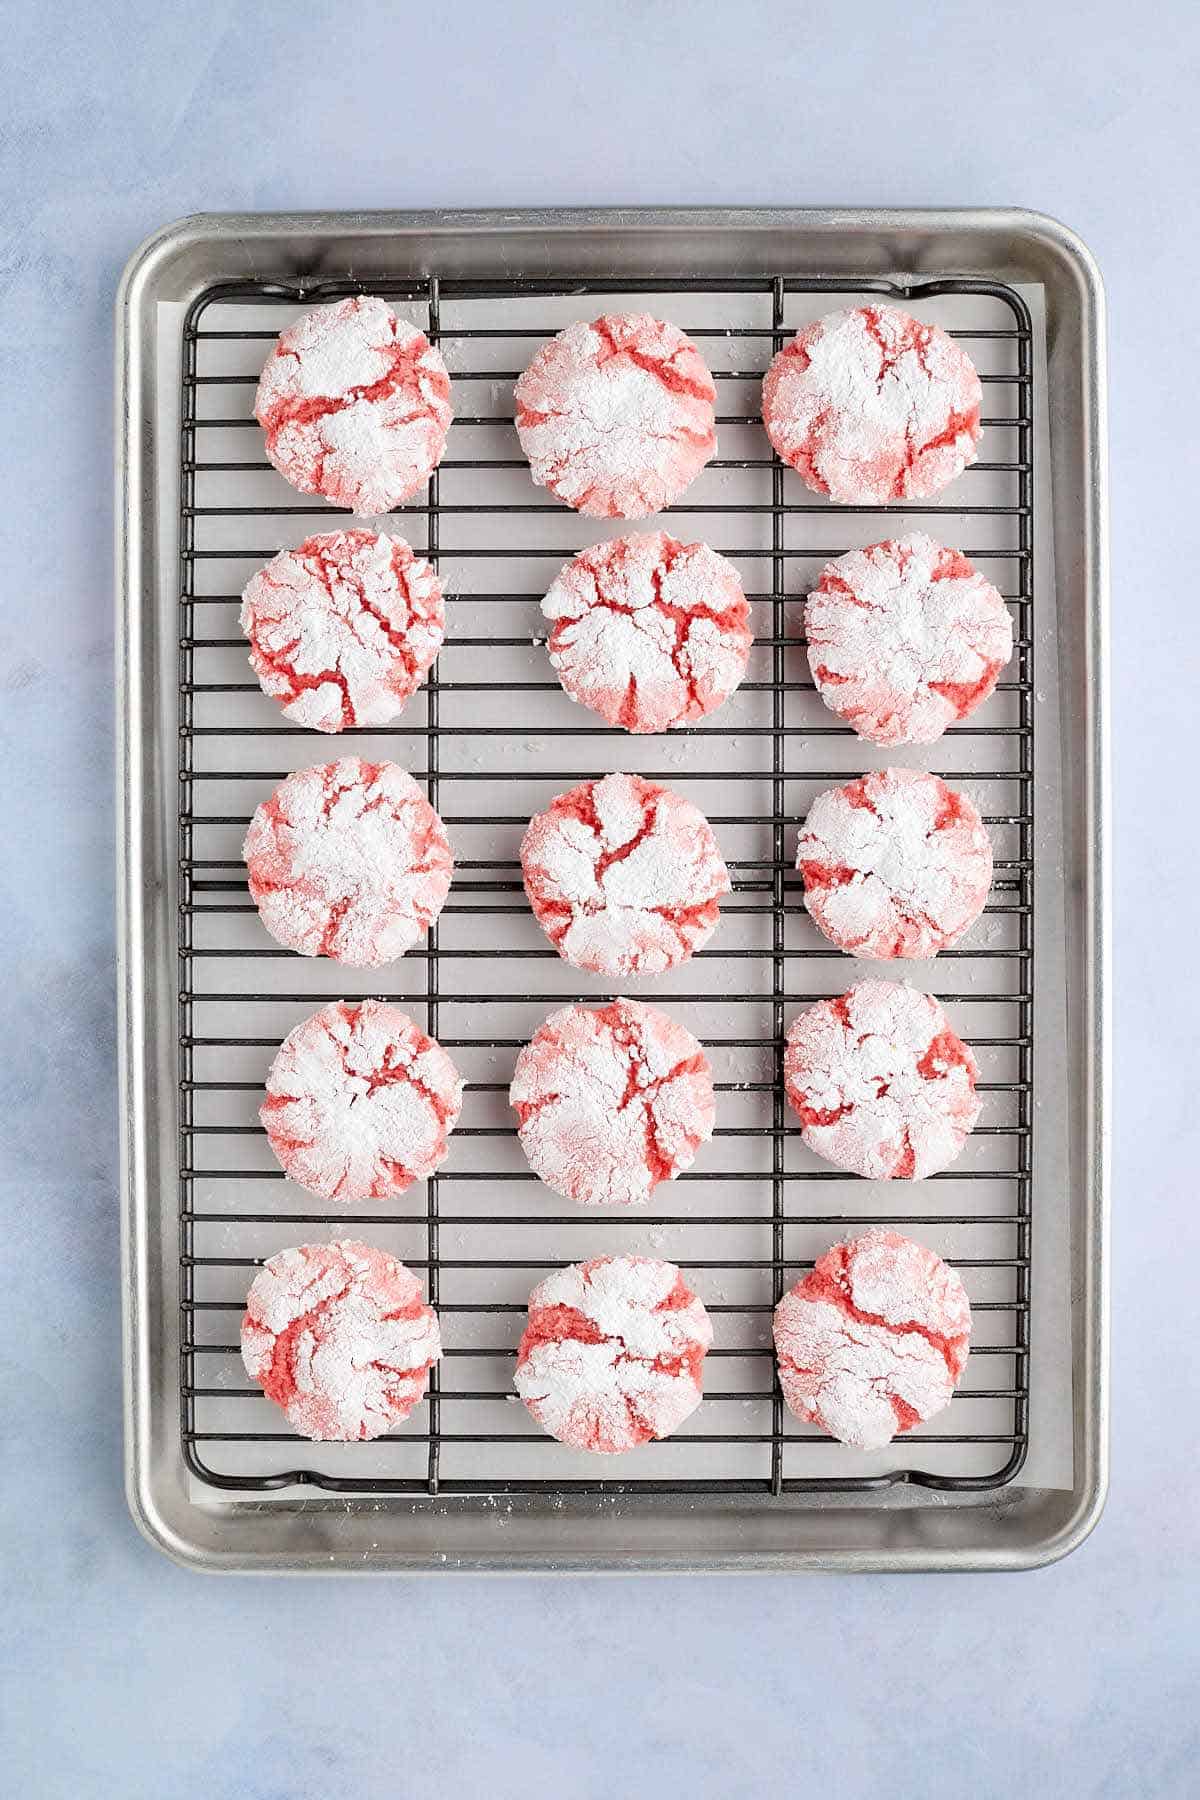 A cooling rack filled with baked strawberry crinkle cookies.